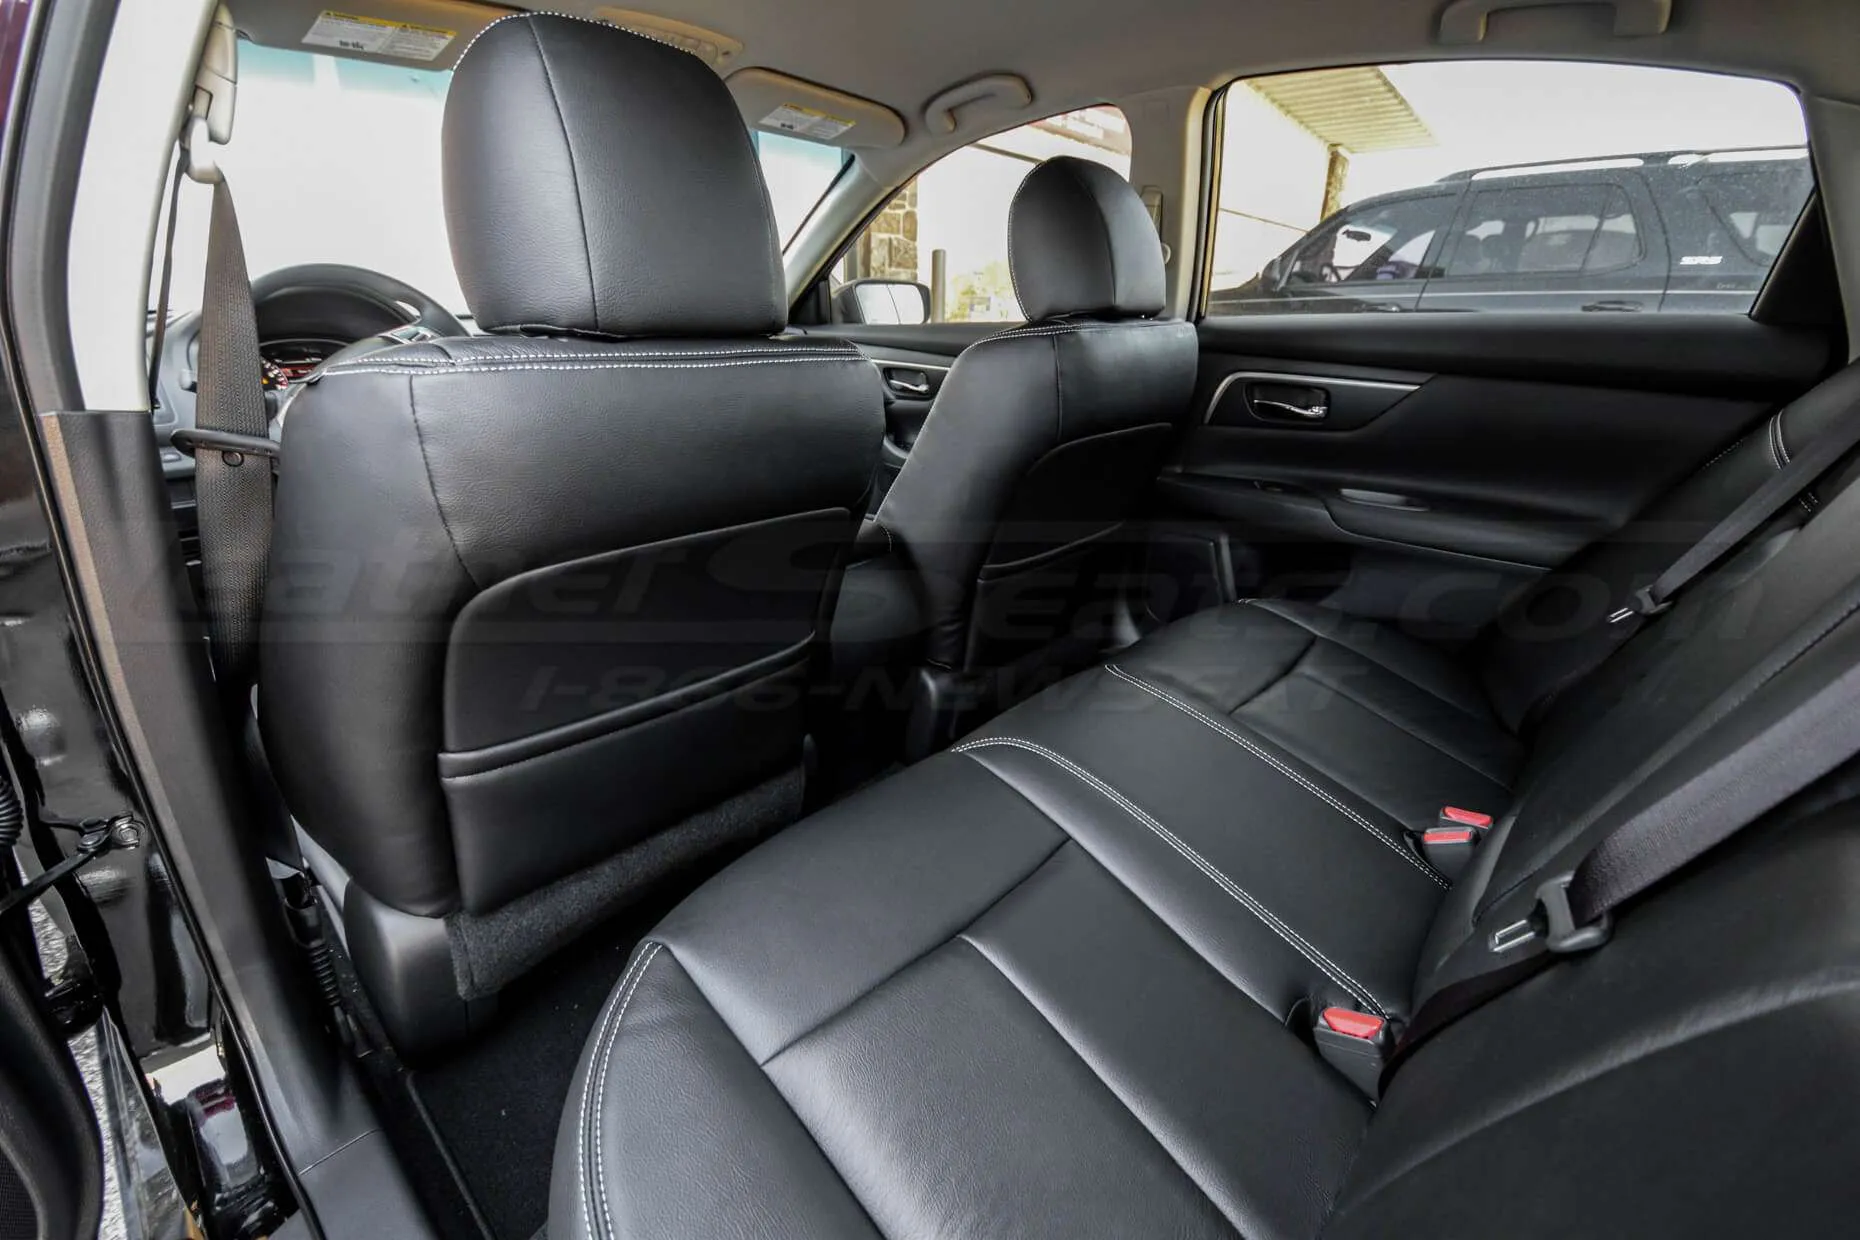 2013-2018 Nissan Altima - Single Tone Black w/ Silver stitching - Back view of front seats